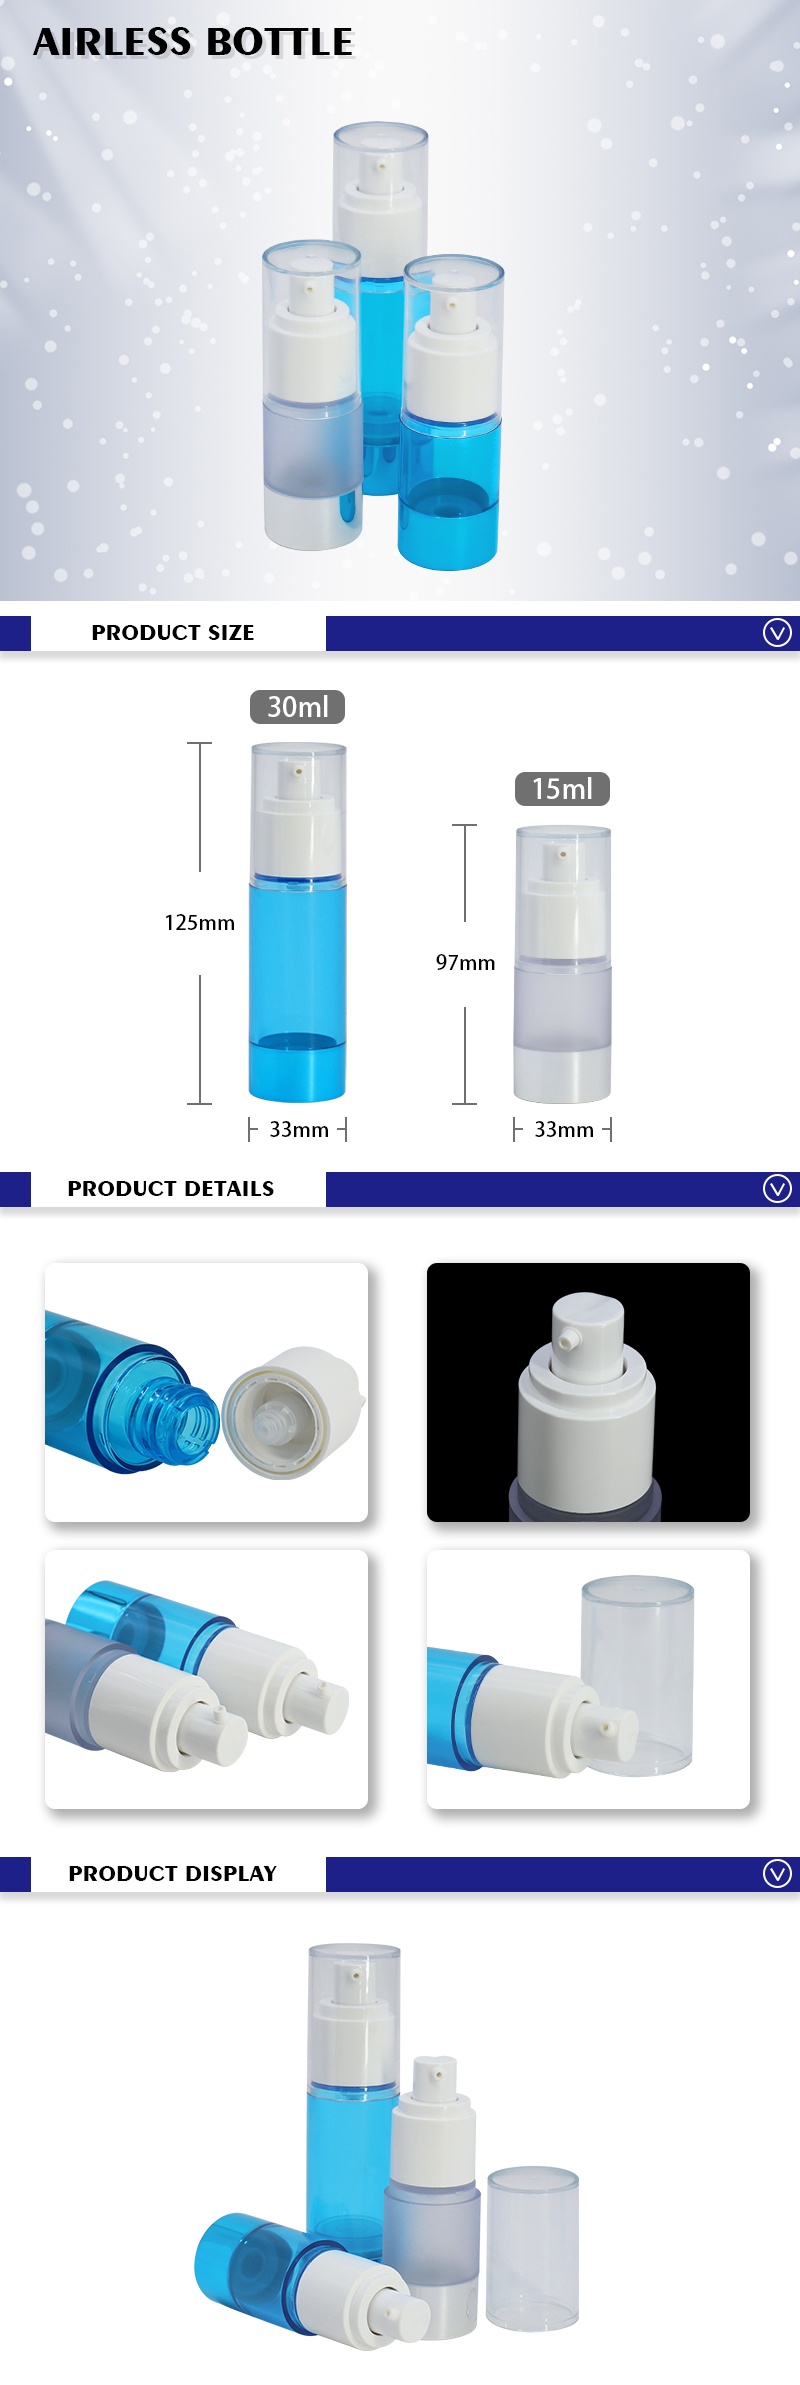 15ml 30ml Refillable Clear Airless Cosmetic Spray Bottles / Empty Plastic Liquid Bottle